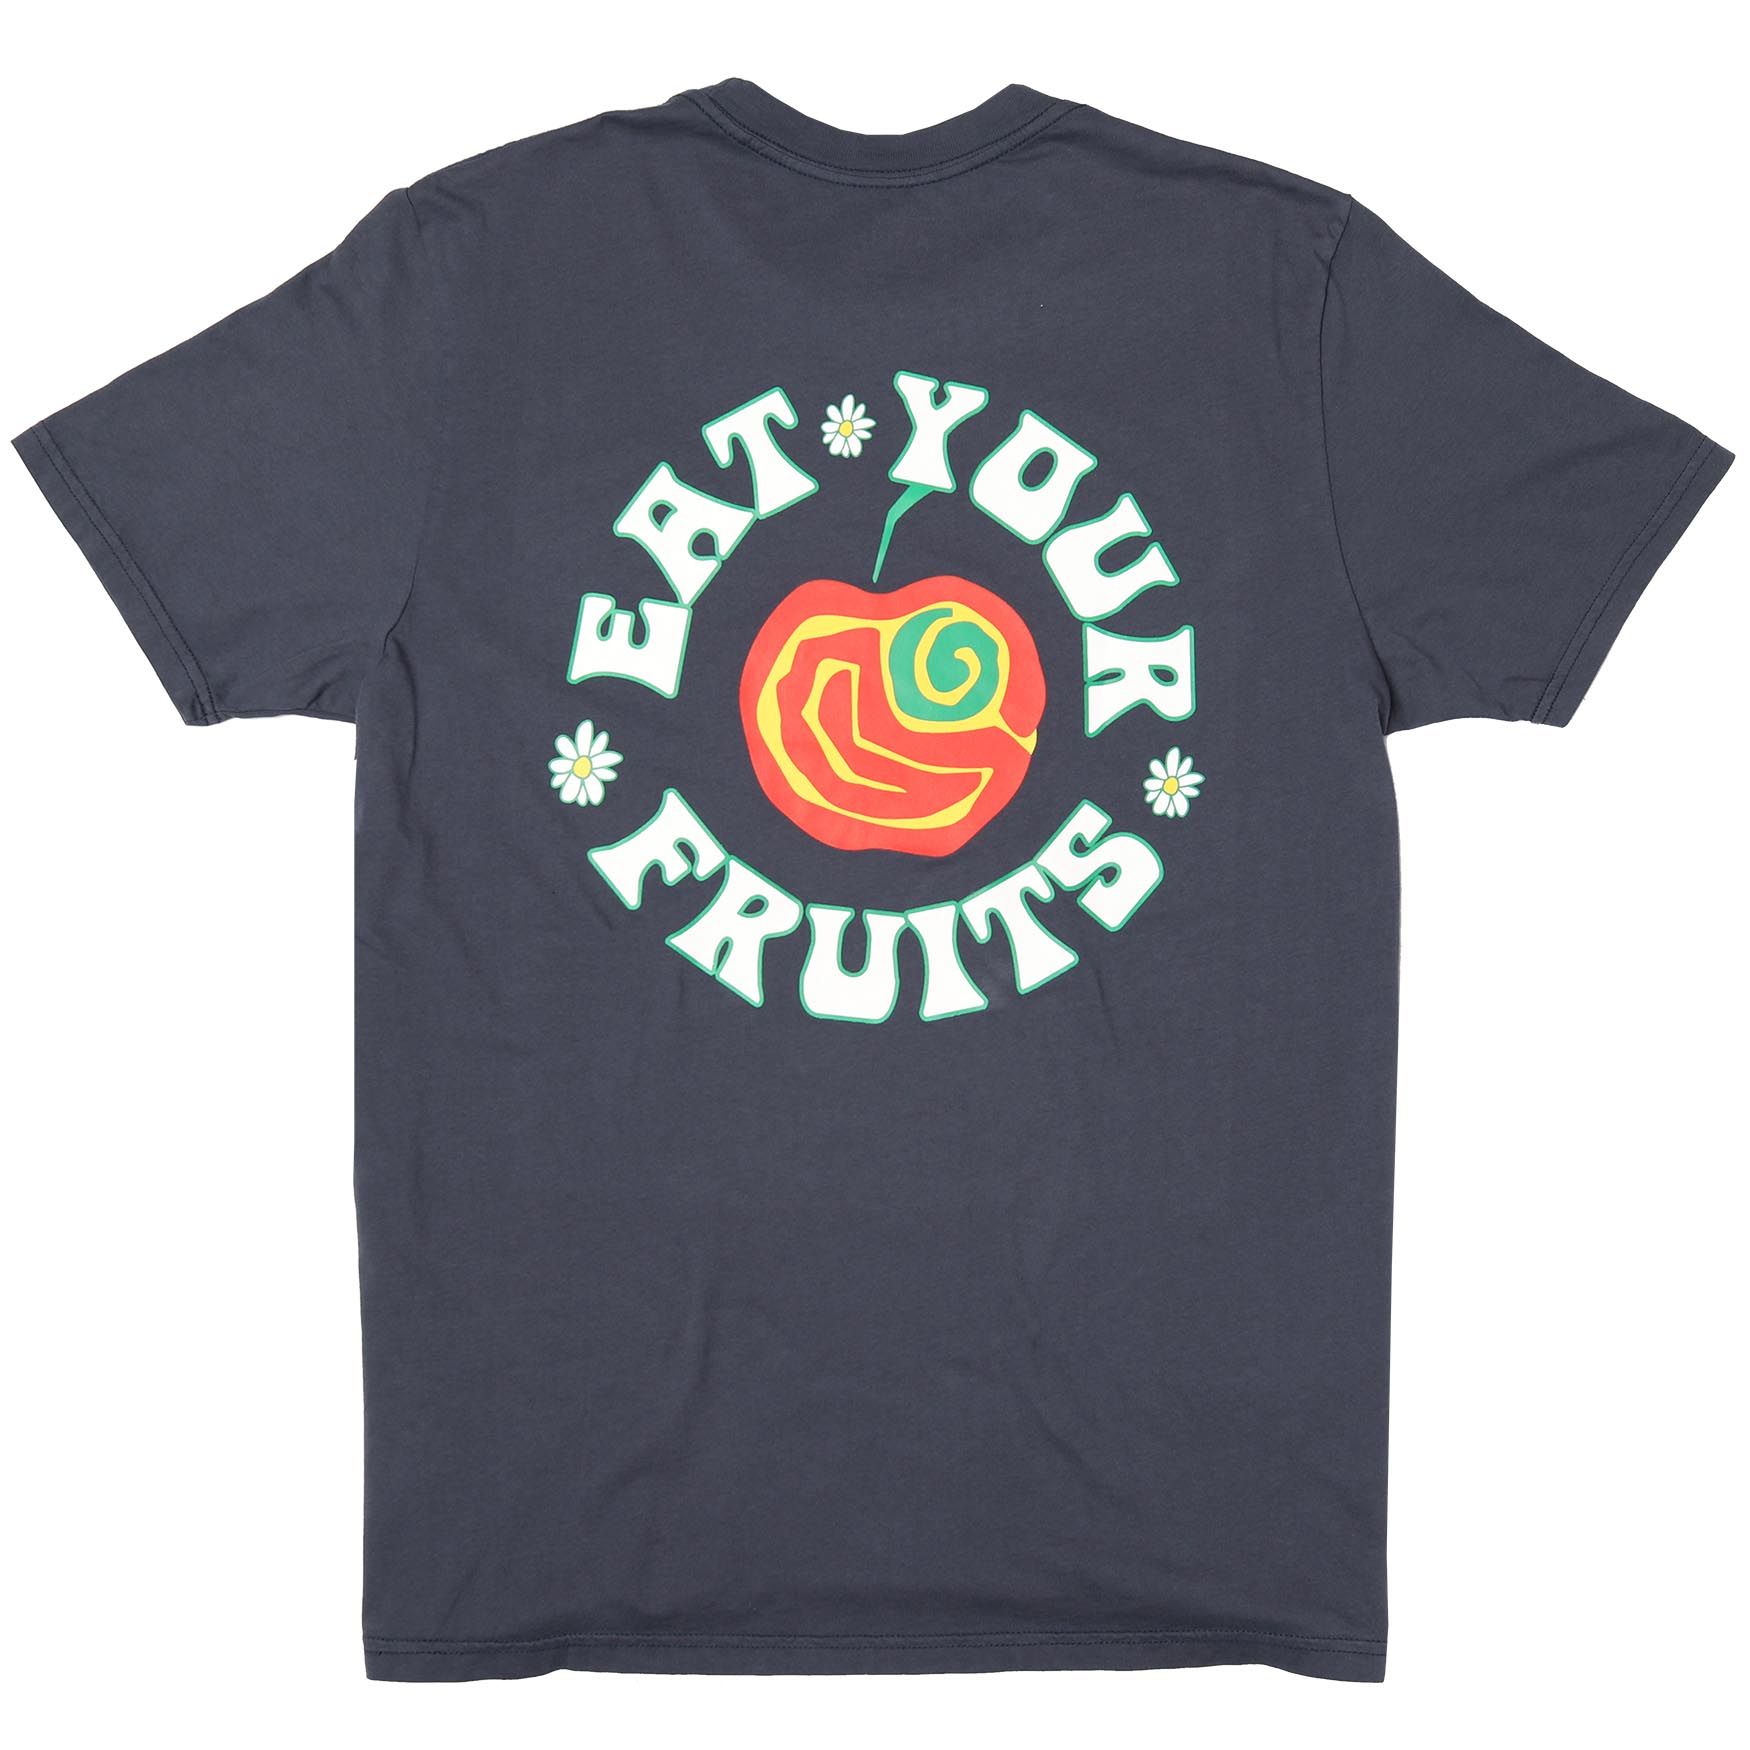 Eat Your Fruits graphic tee printed on front and back